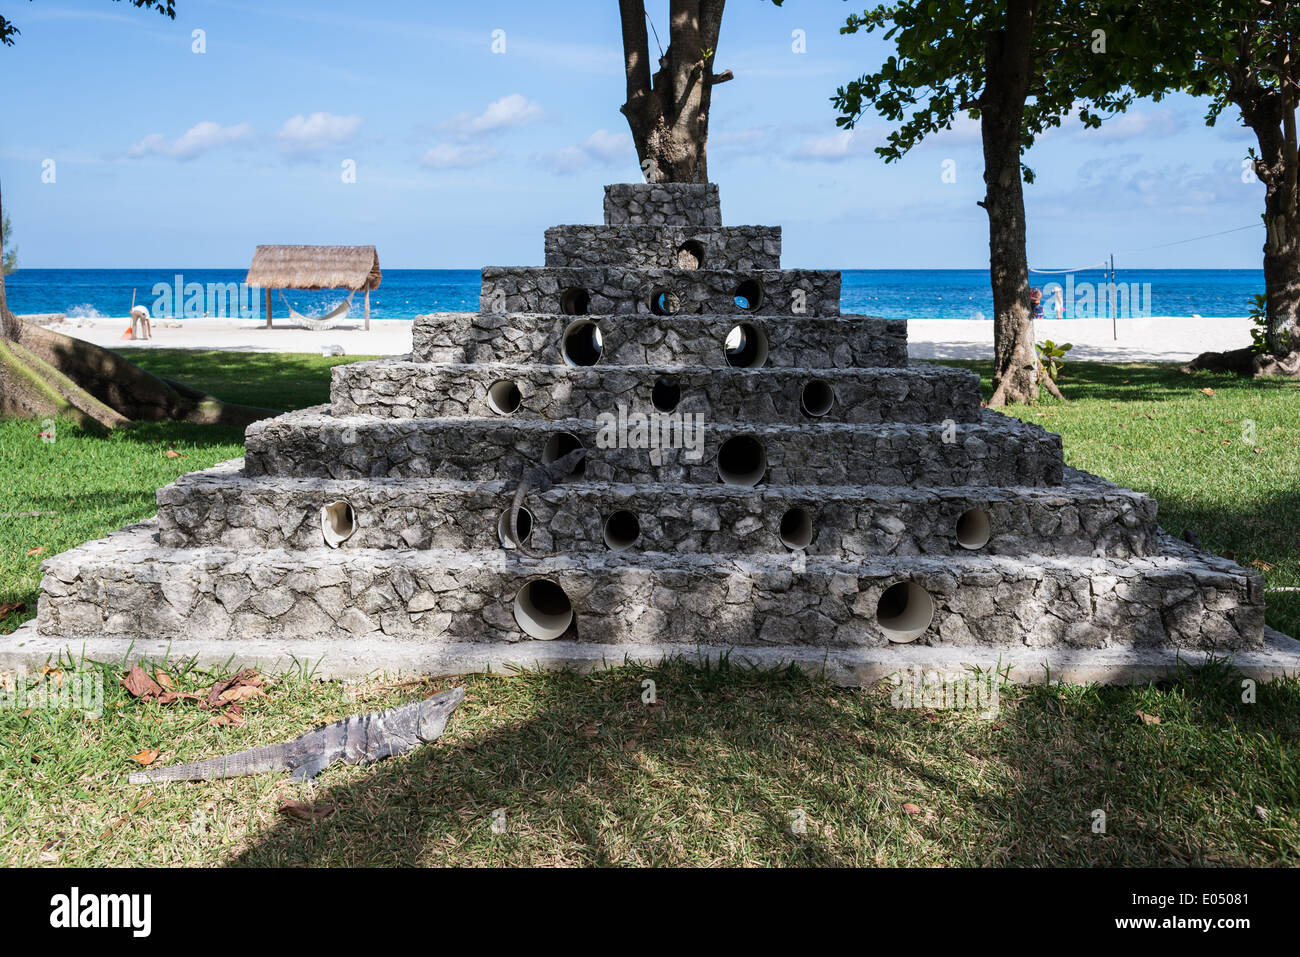 Temple of Iguanas, a stone structure mimic Maya temple, set for Iguanas living at this beach resort. Cozumel, Mexico. Stock Photo